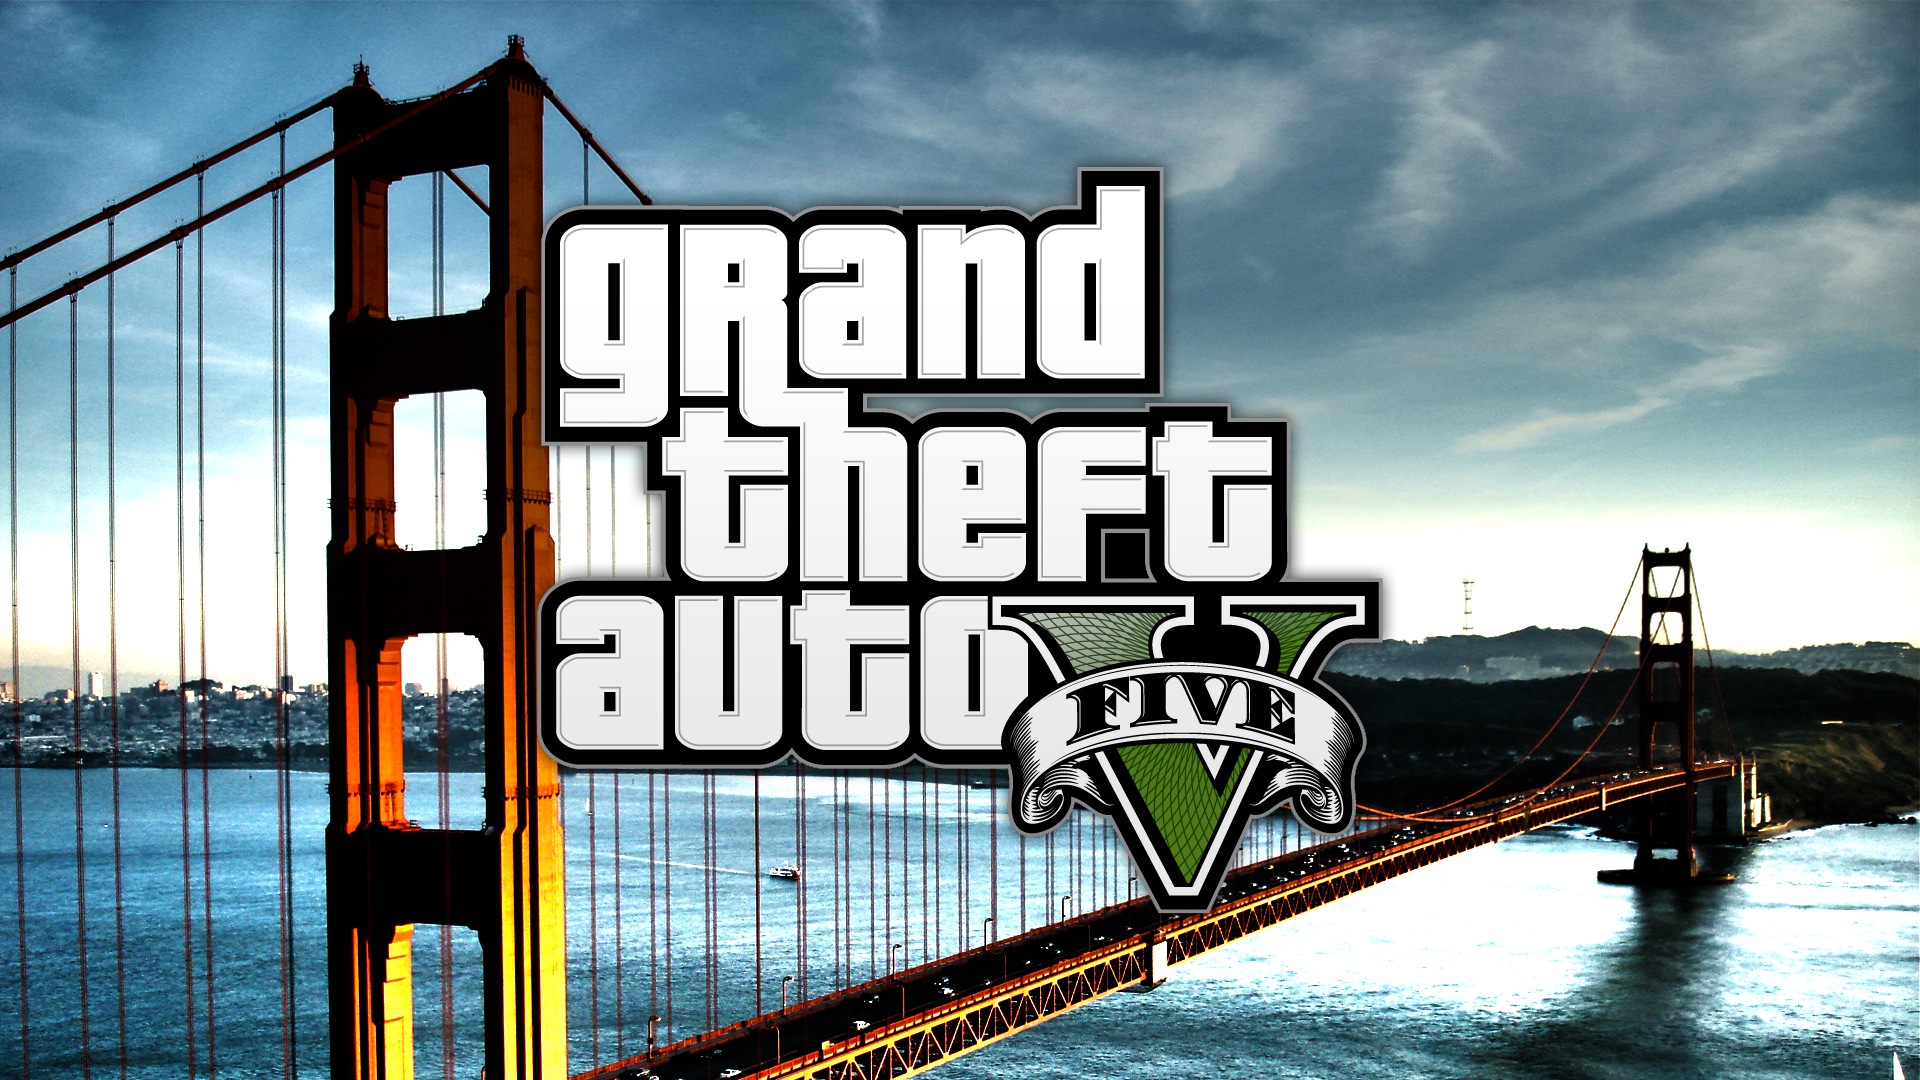 Grand Theft Auto V GTA 5 HD game wallpapers #16 - 1920x1080